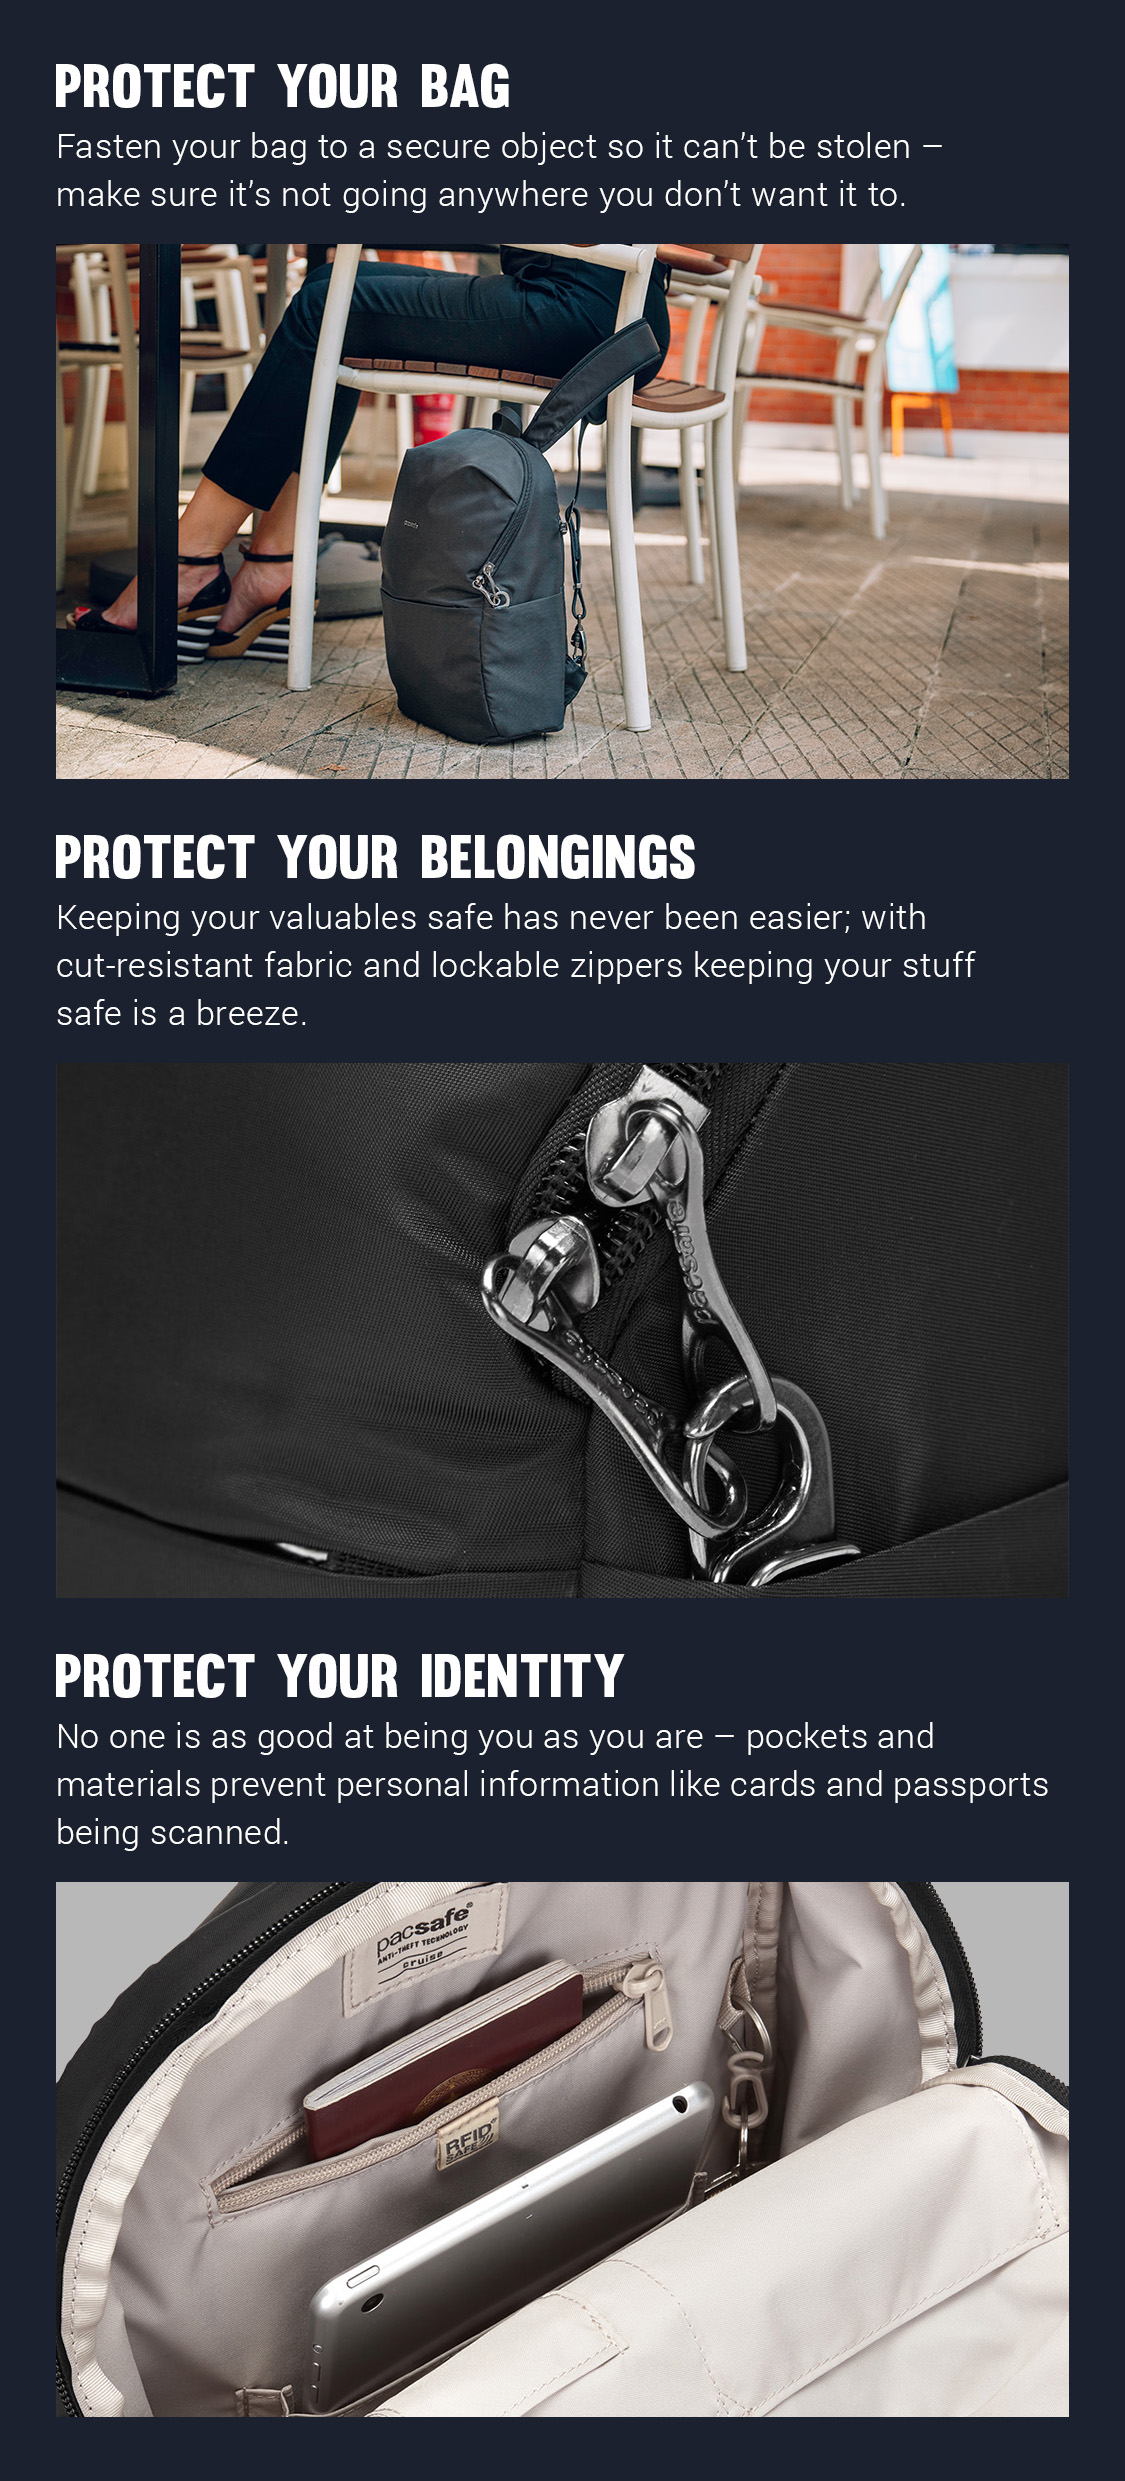 How to Lock a Backpack: Protect Your Belongings with Ease